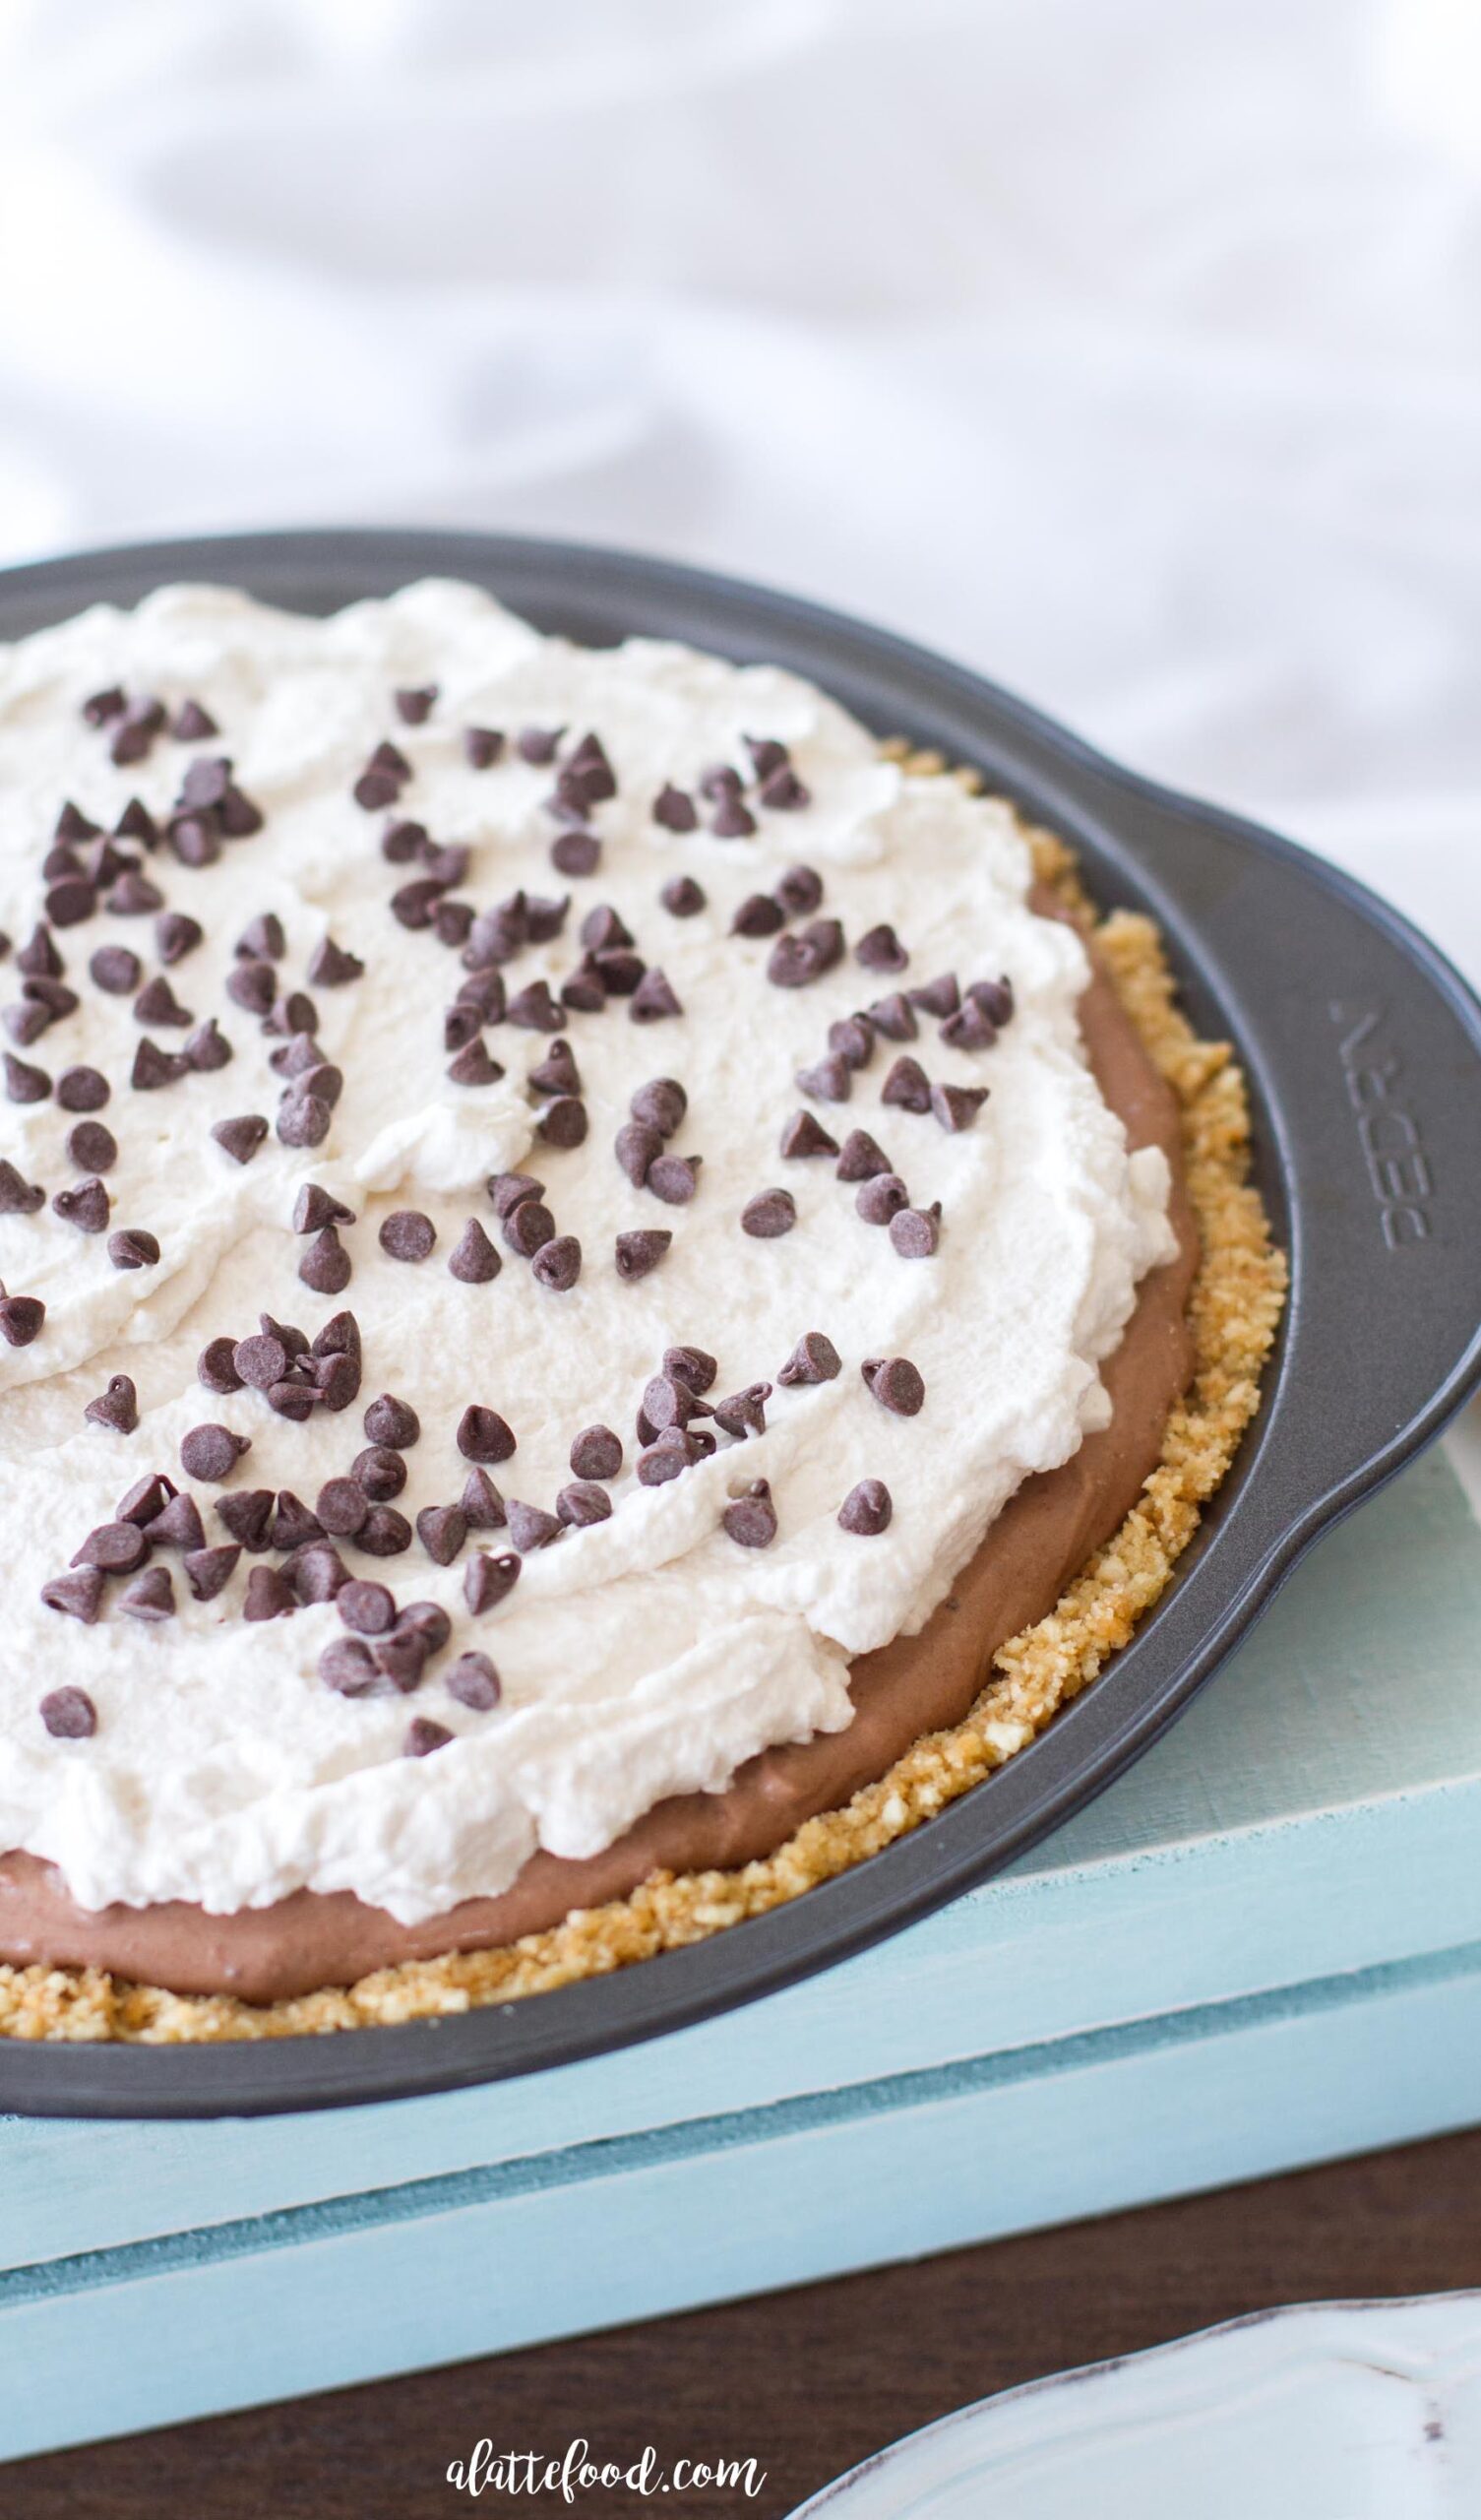  This pie is sure to be the star of your next dessert spread.